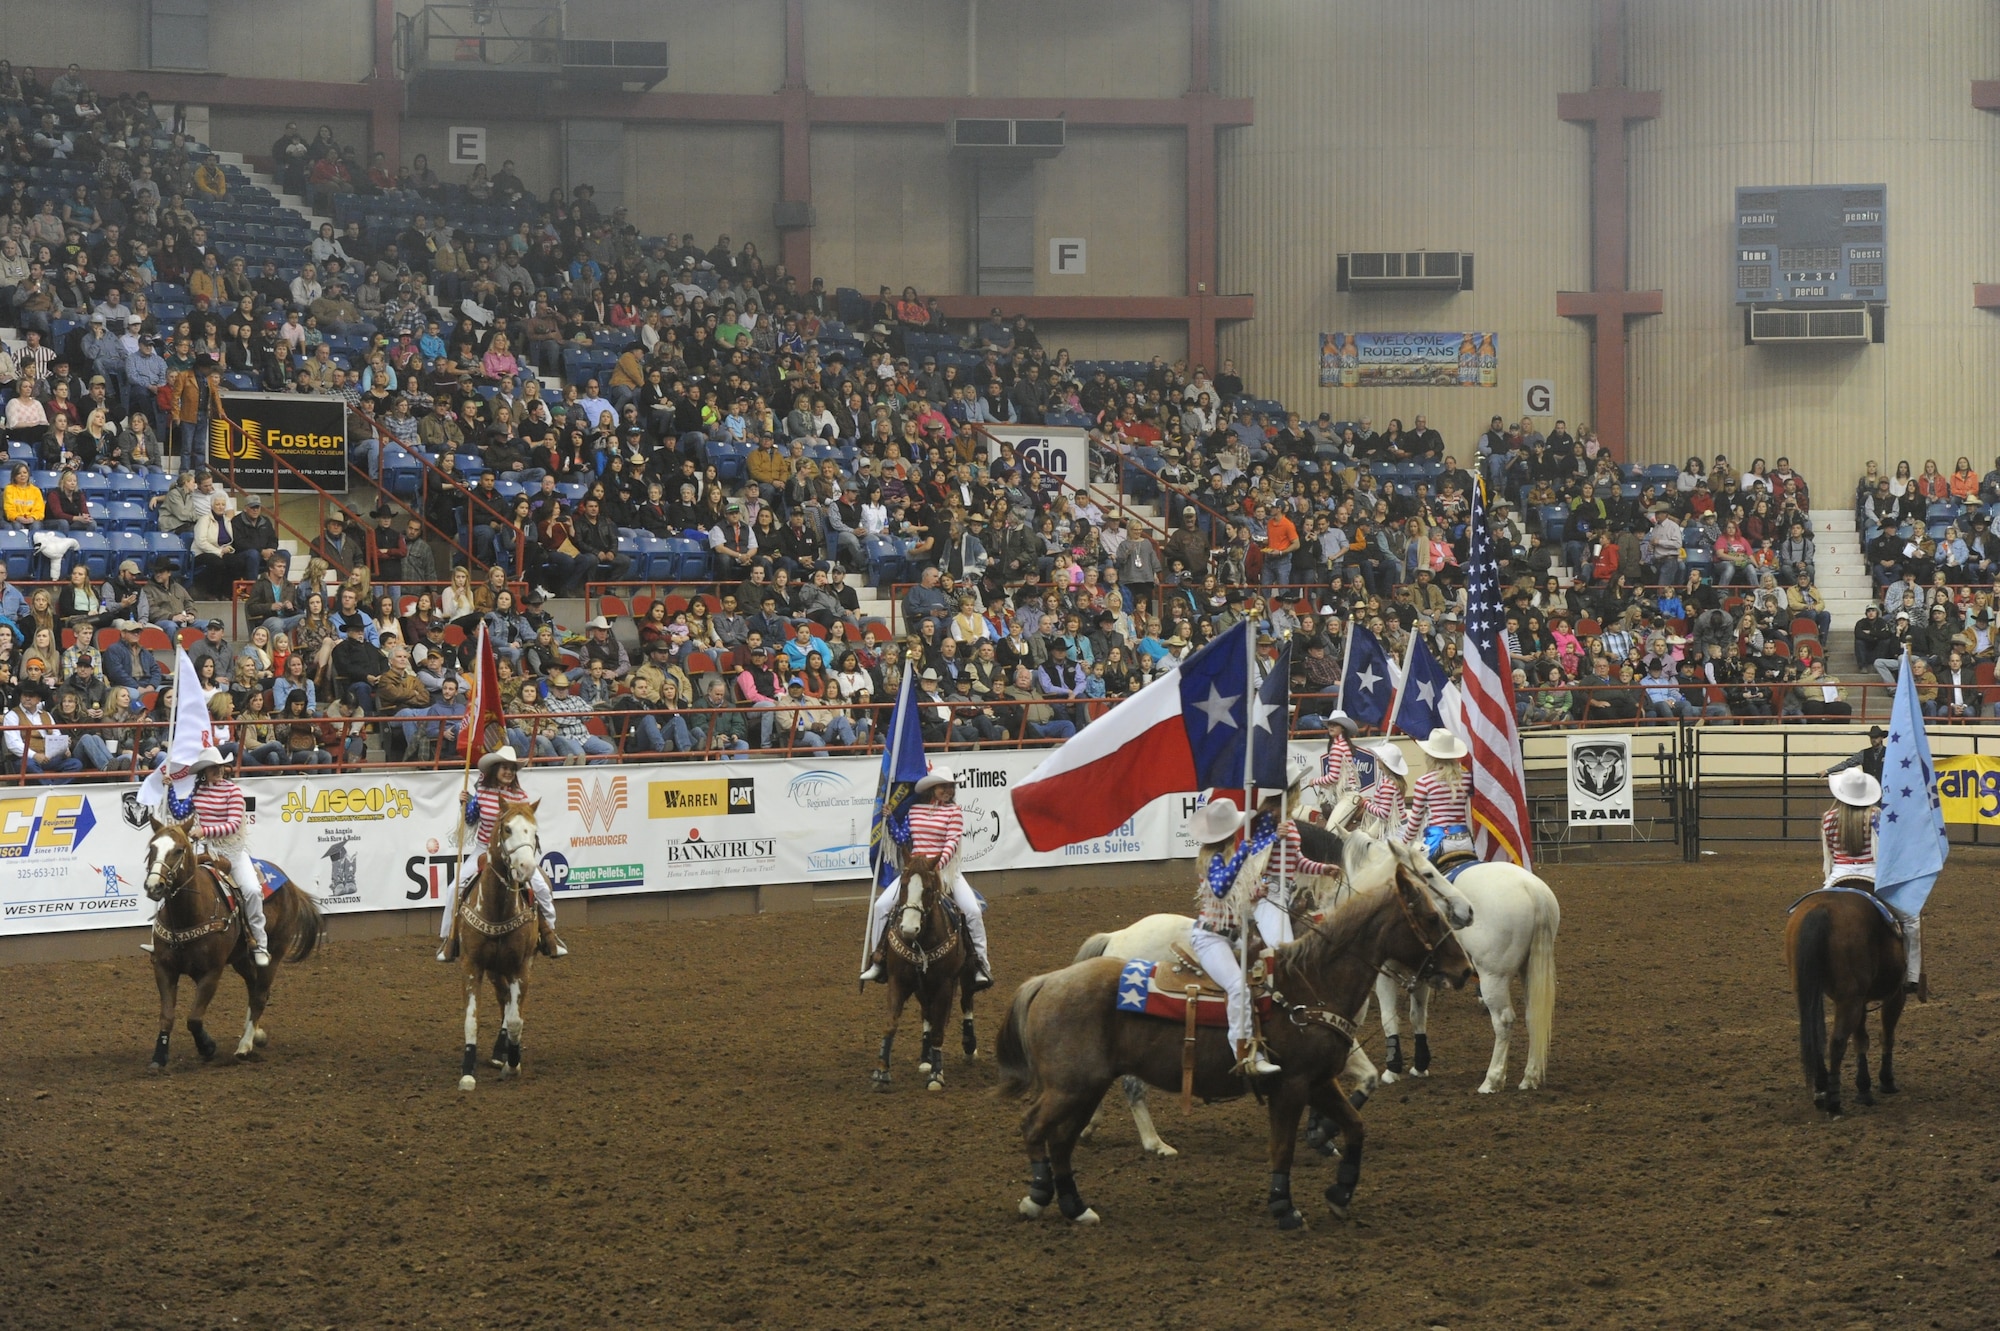 SAN ANGELO, Texas --The San Angelo Stock Show and Rodeo Drill Team Ambassadors present the American and service flags during the San Angelo Stock Show and Rodeo’s Military Appreciation Night at the Foster Communication Coliseum here Feb. 26. Goodfellow Air Force Base’s Patriotic Blue sang the national anthem during the flag presentation. (U.S. Air Force photo/ Staff Sgt. Laura R. McFarlane)
